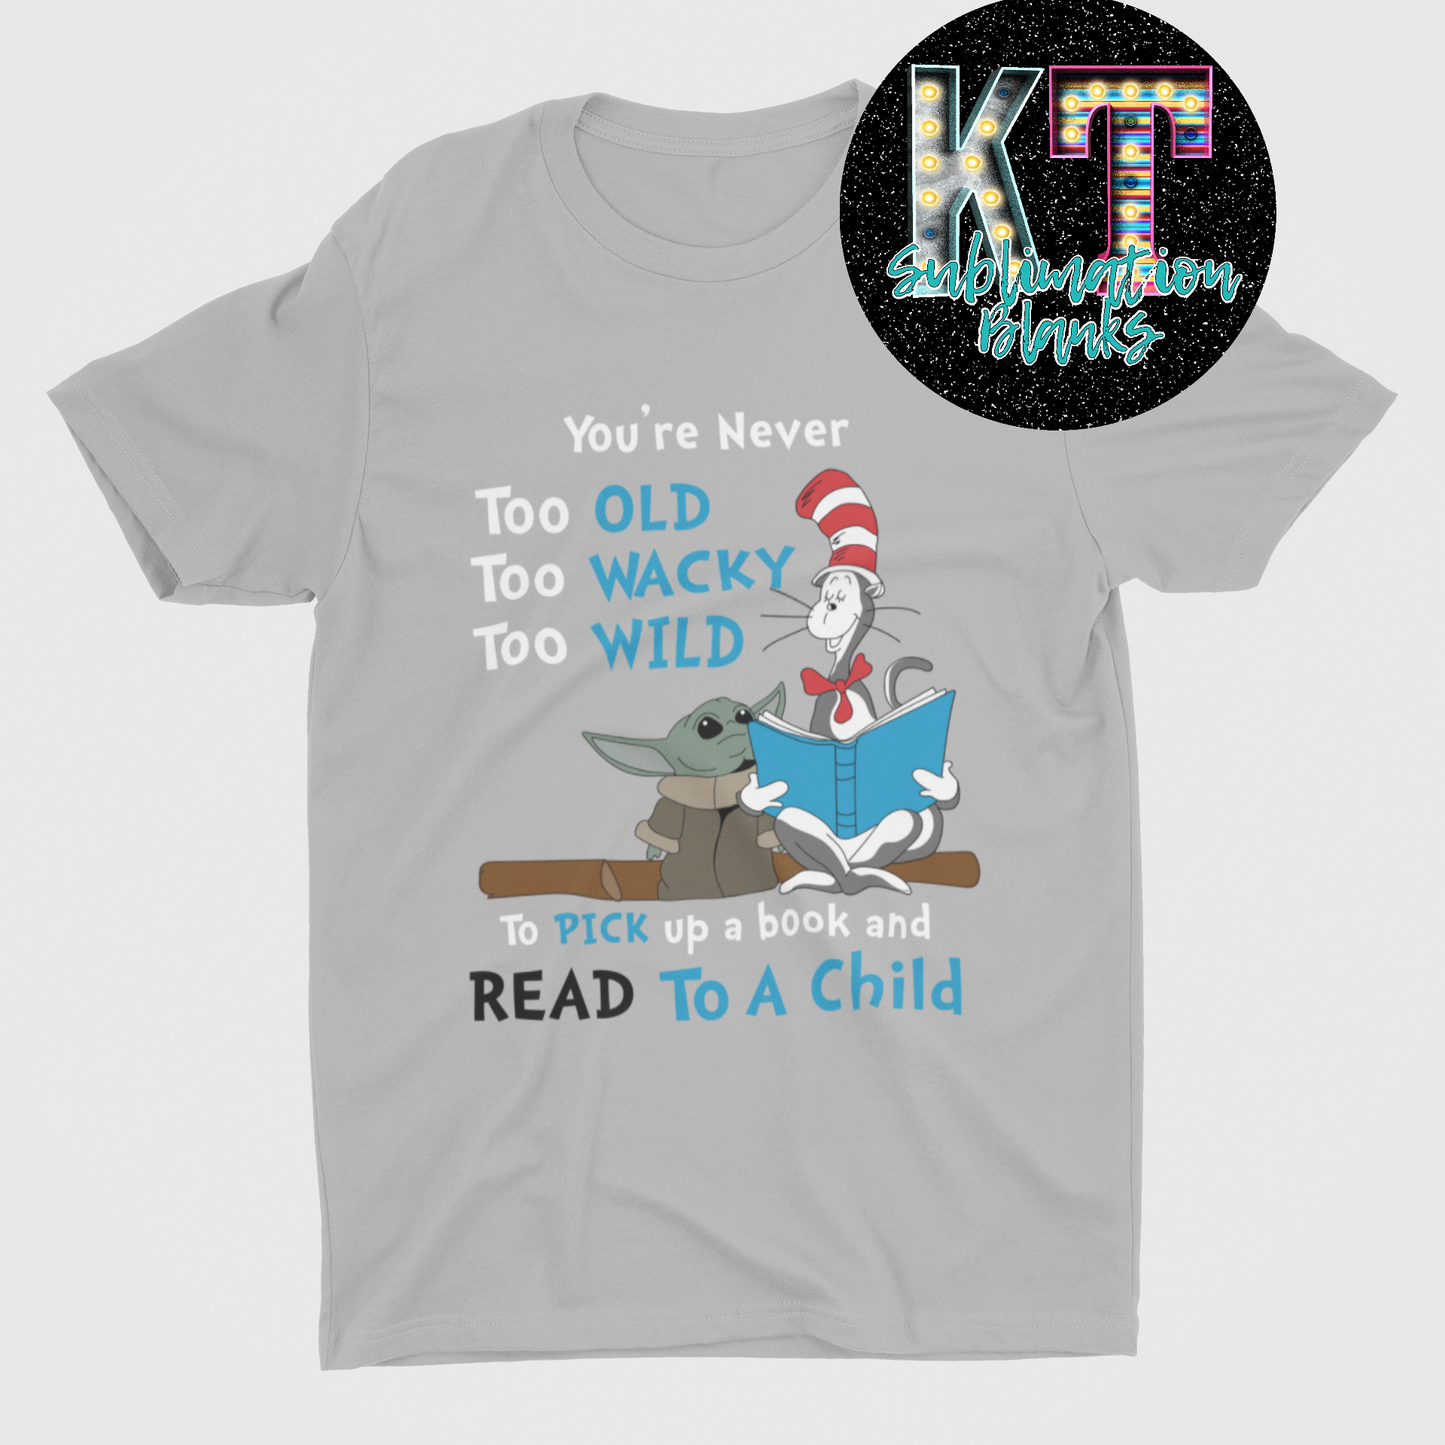 You're Never Too old Unisex T-shirt